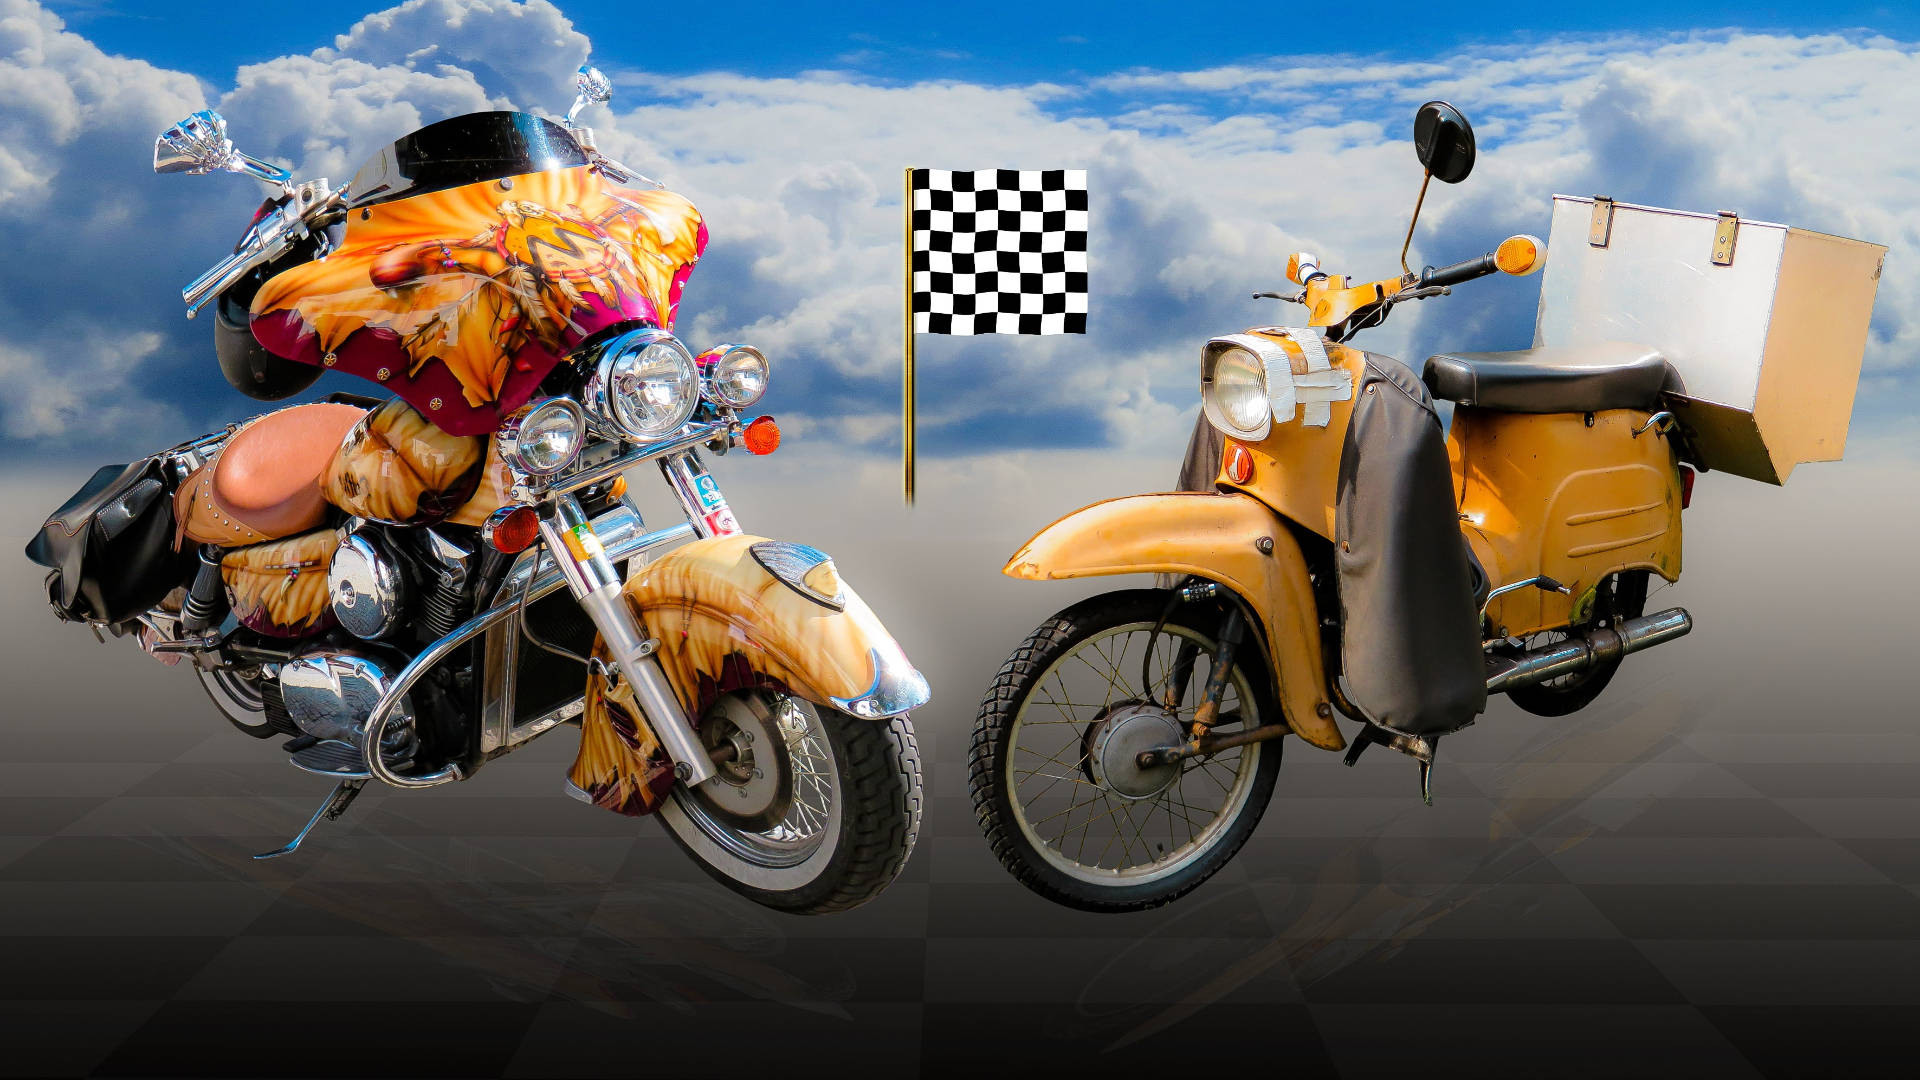 Two Motorcycles With Checkered Flag Wallpaper